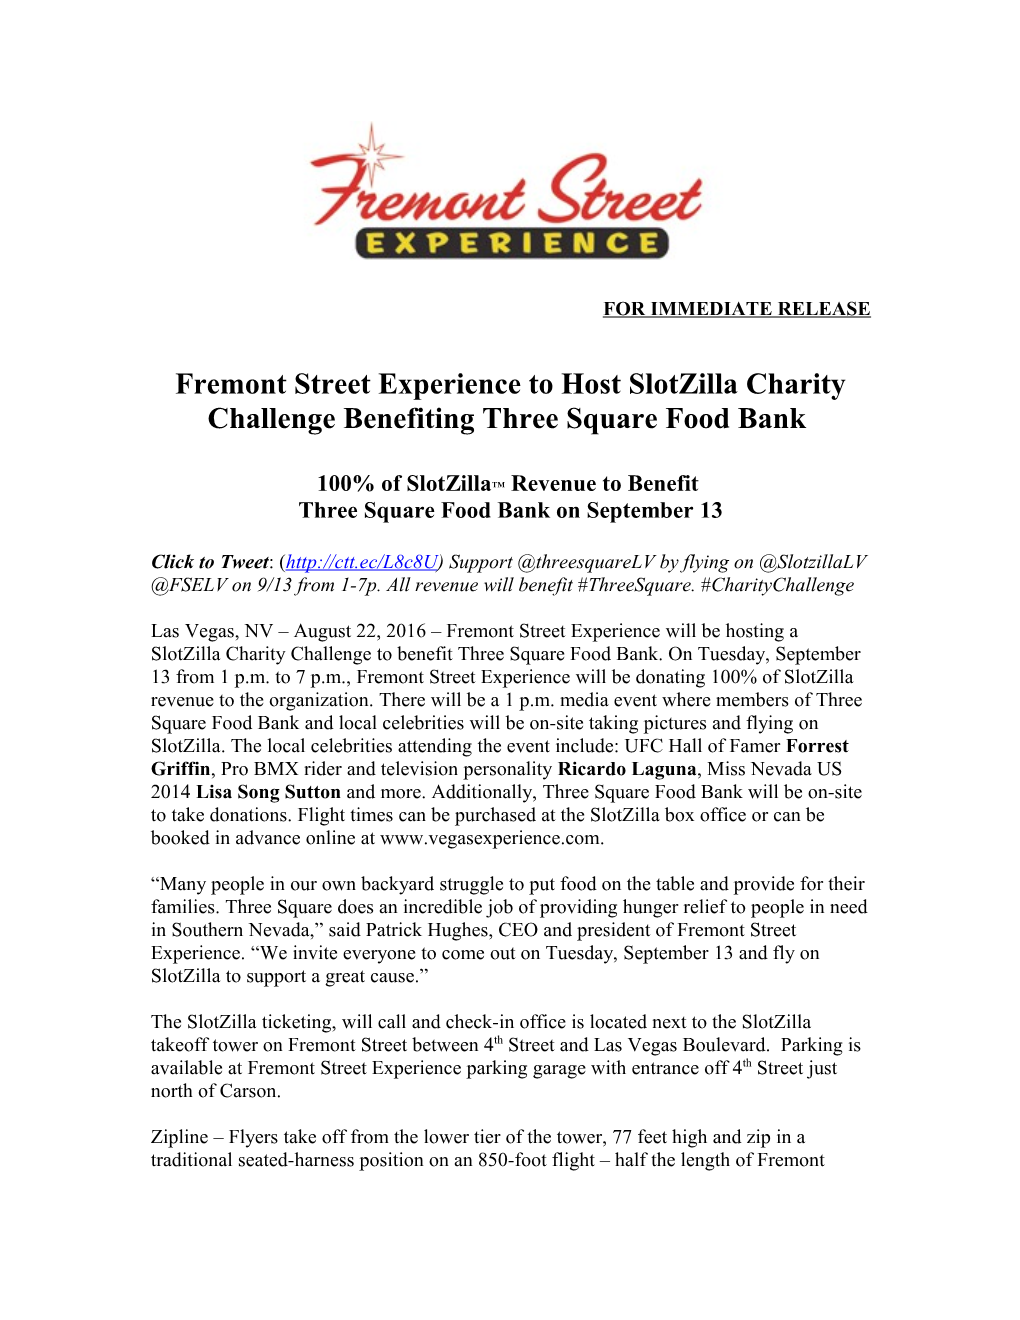 Fremont Street Experience to Hostslotzilla Charity Challenge Benefiting Three Square Food Bank